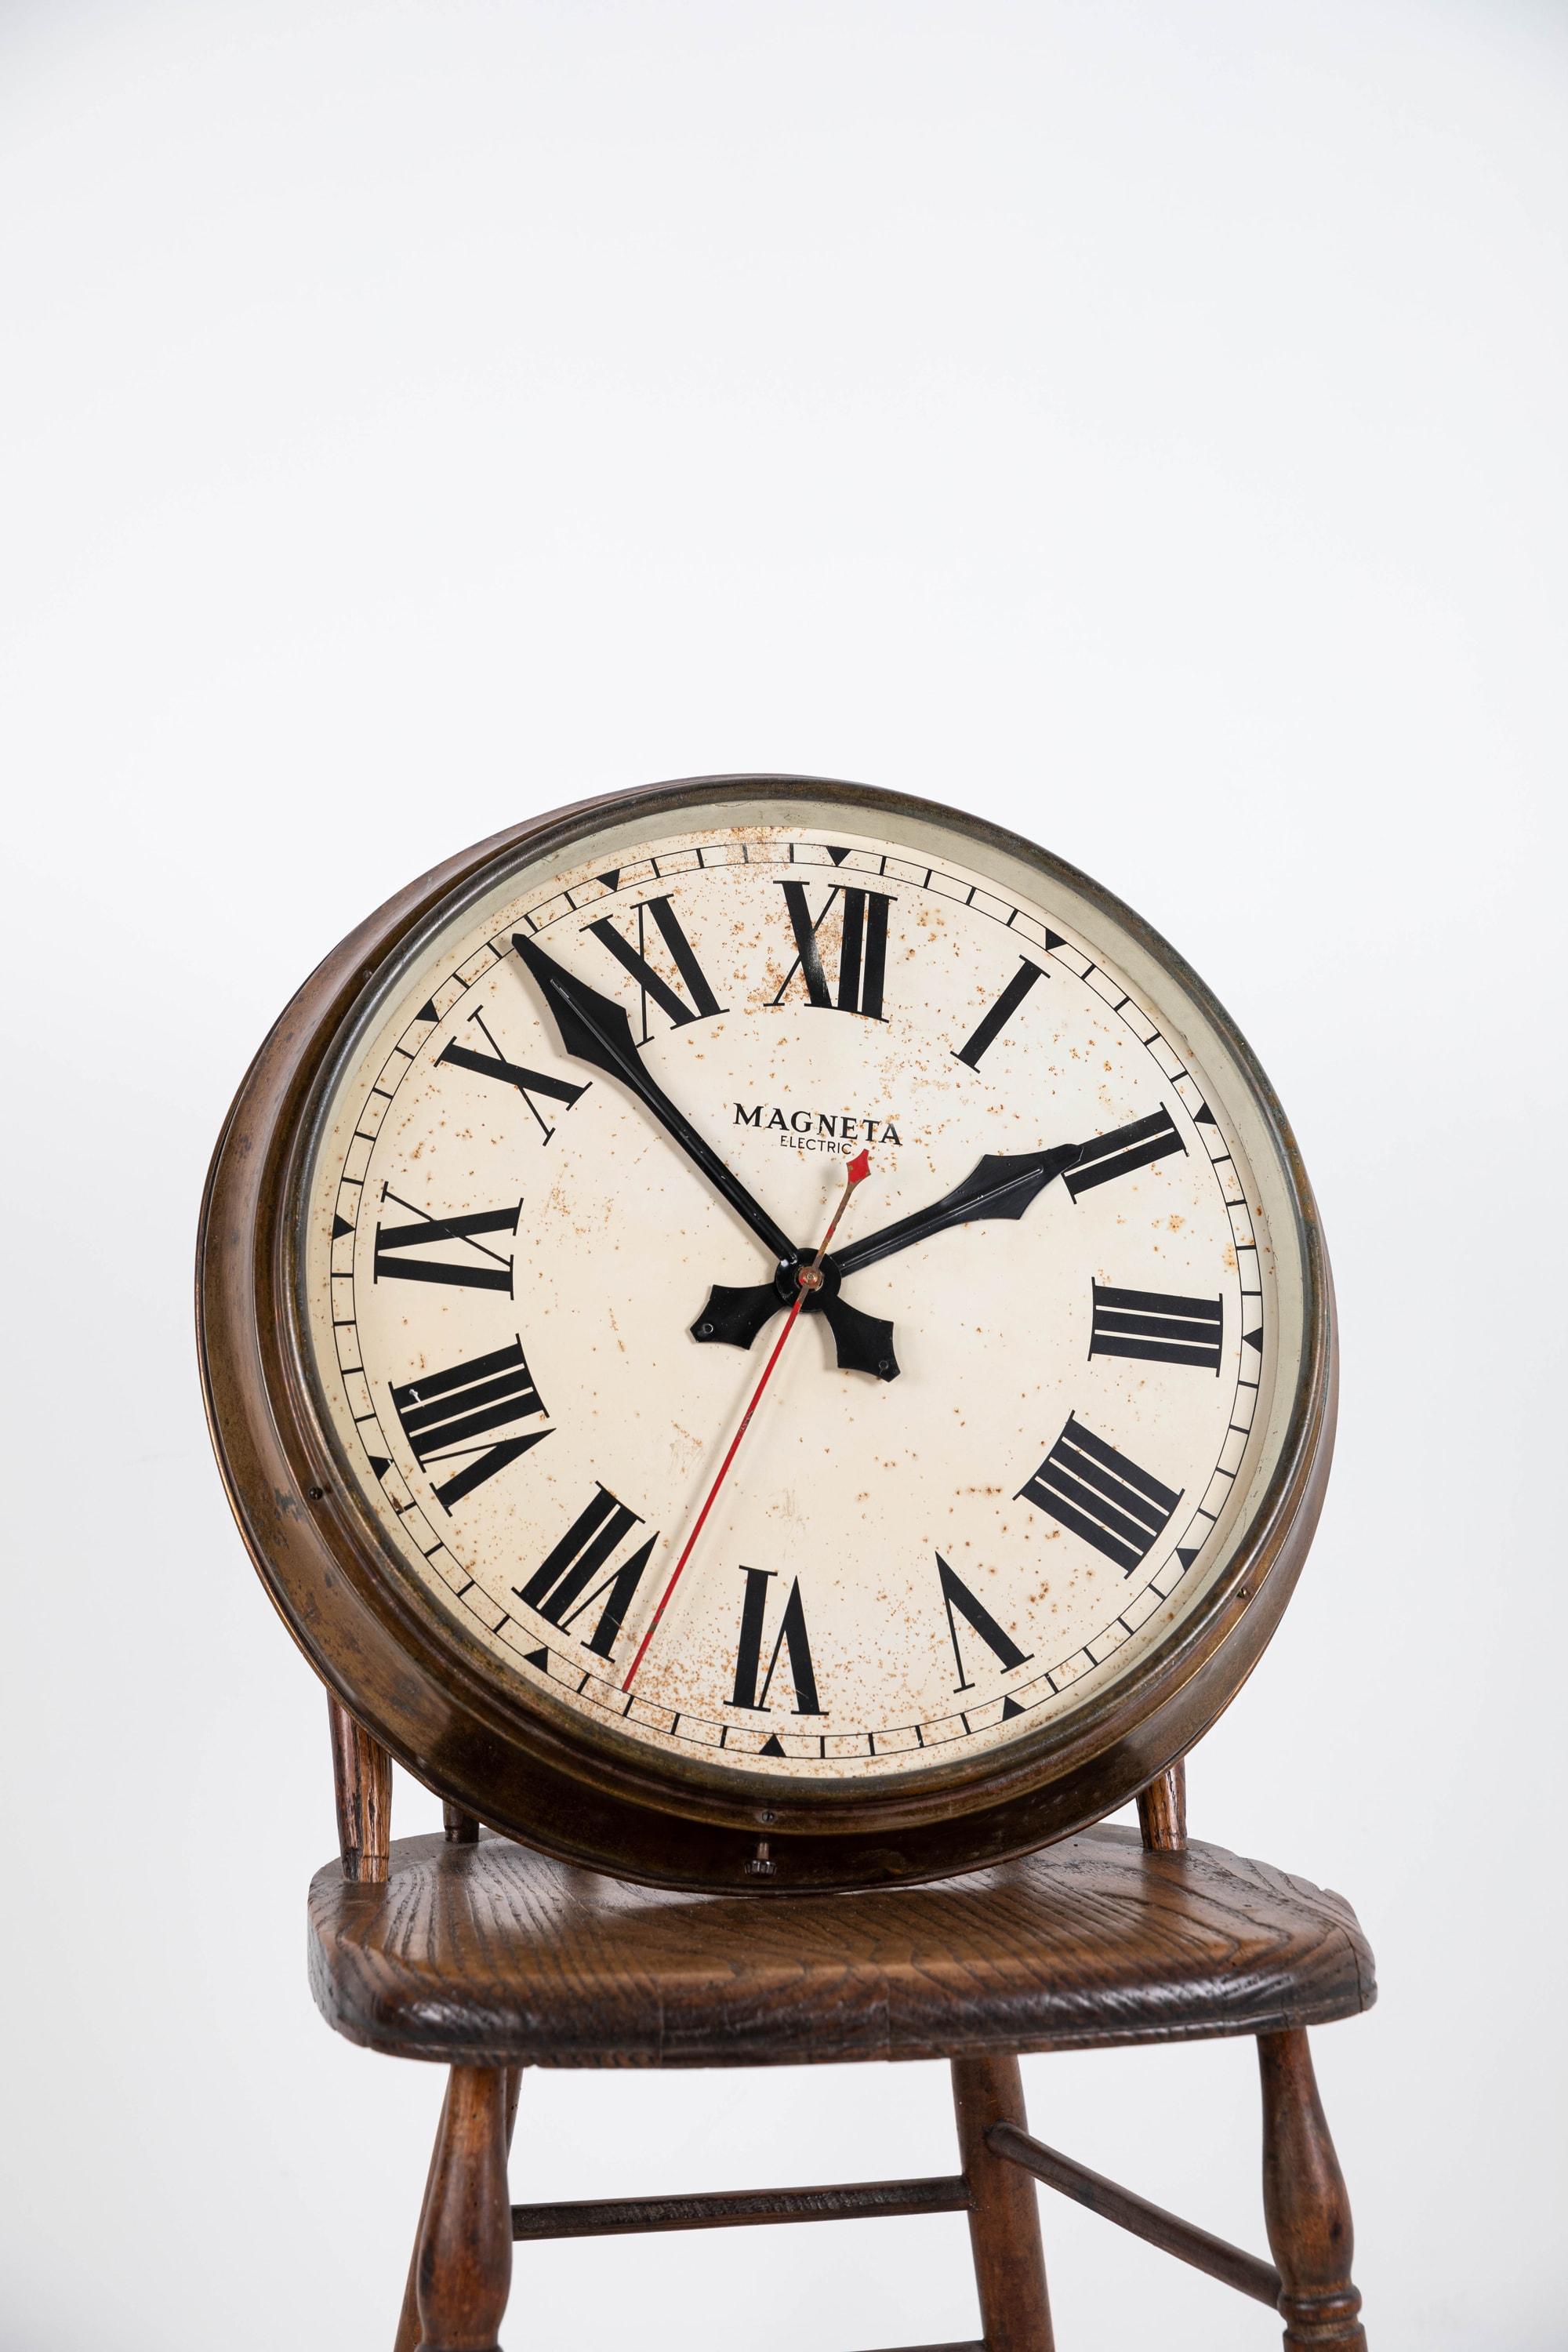 Beautiful industrial clock made in England by well known clock makers Magneta Electric. c.1940

Featuring a sweeping second hand, this clock has been left in original condition, with a very attractive age related patina to the face and brass